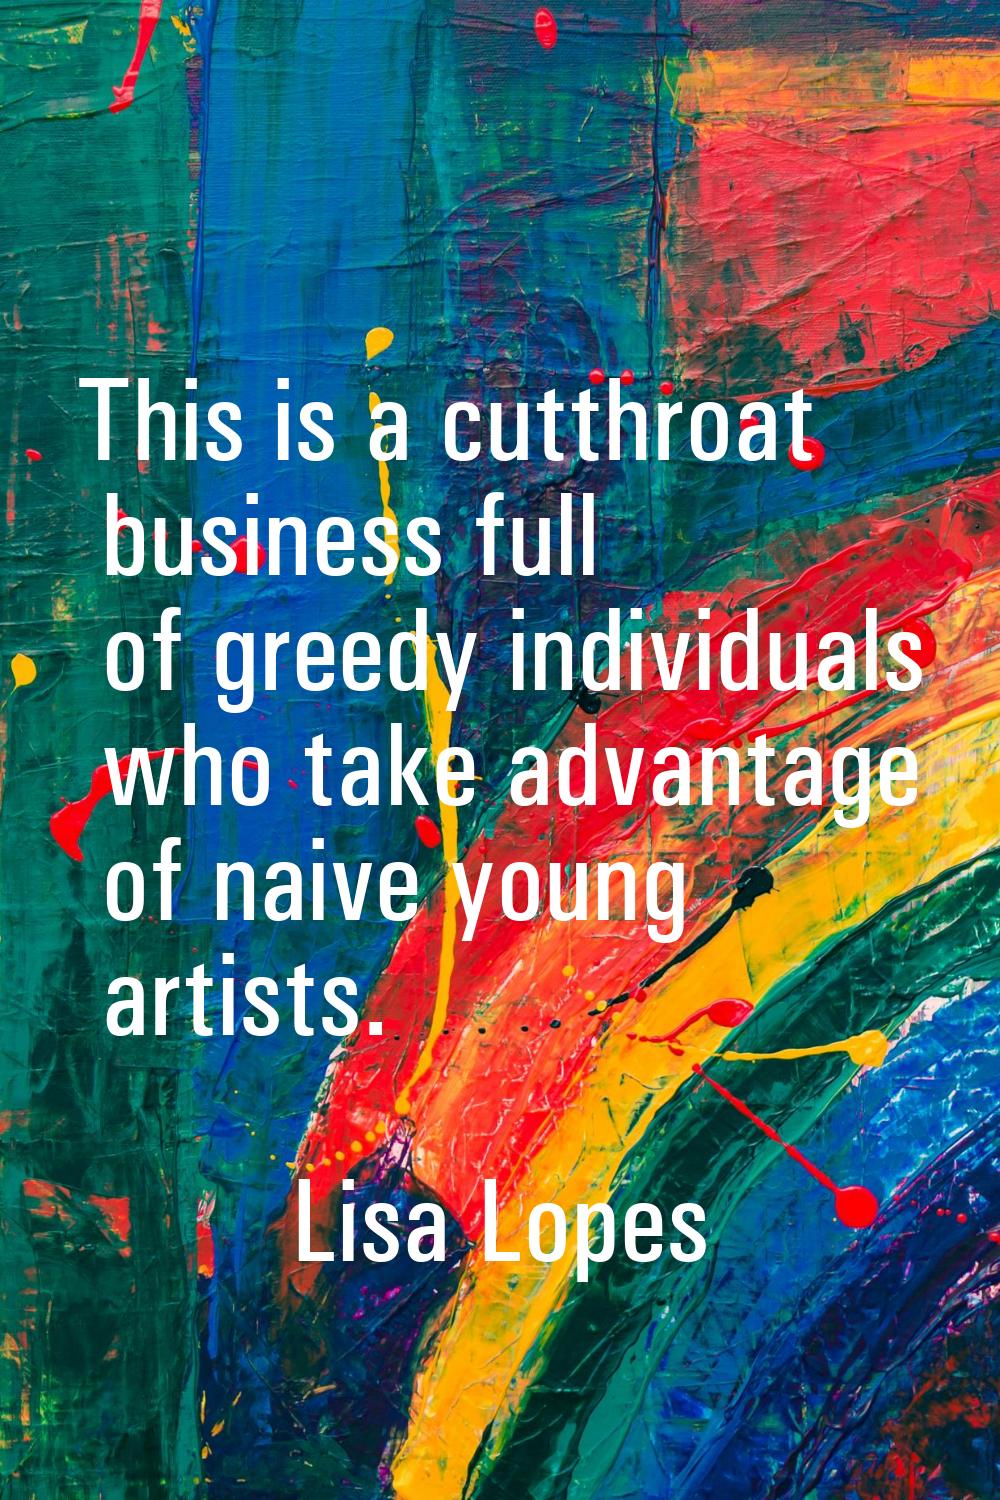 This is a cutthroat business full of greedy individuals who take advantage of naive young artists.